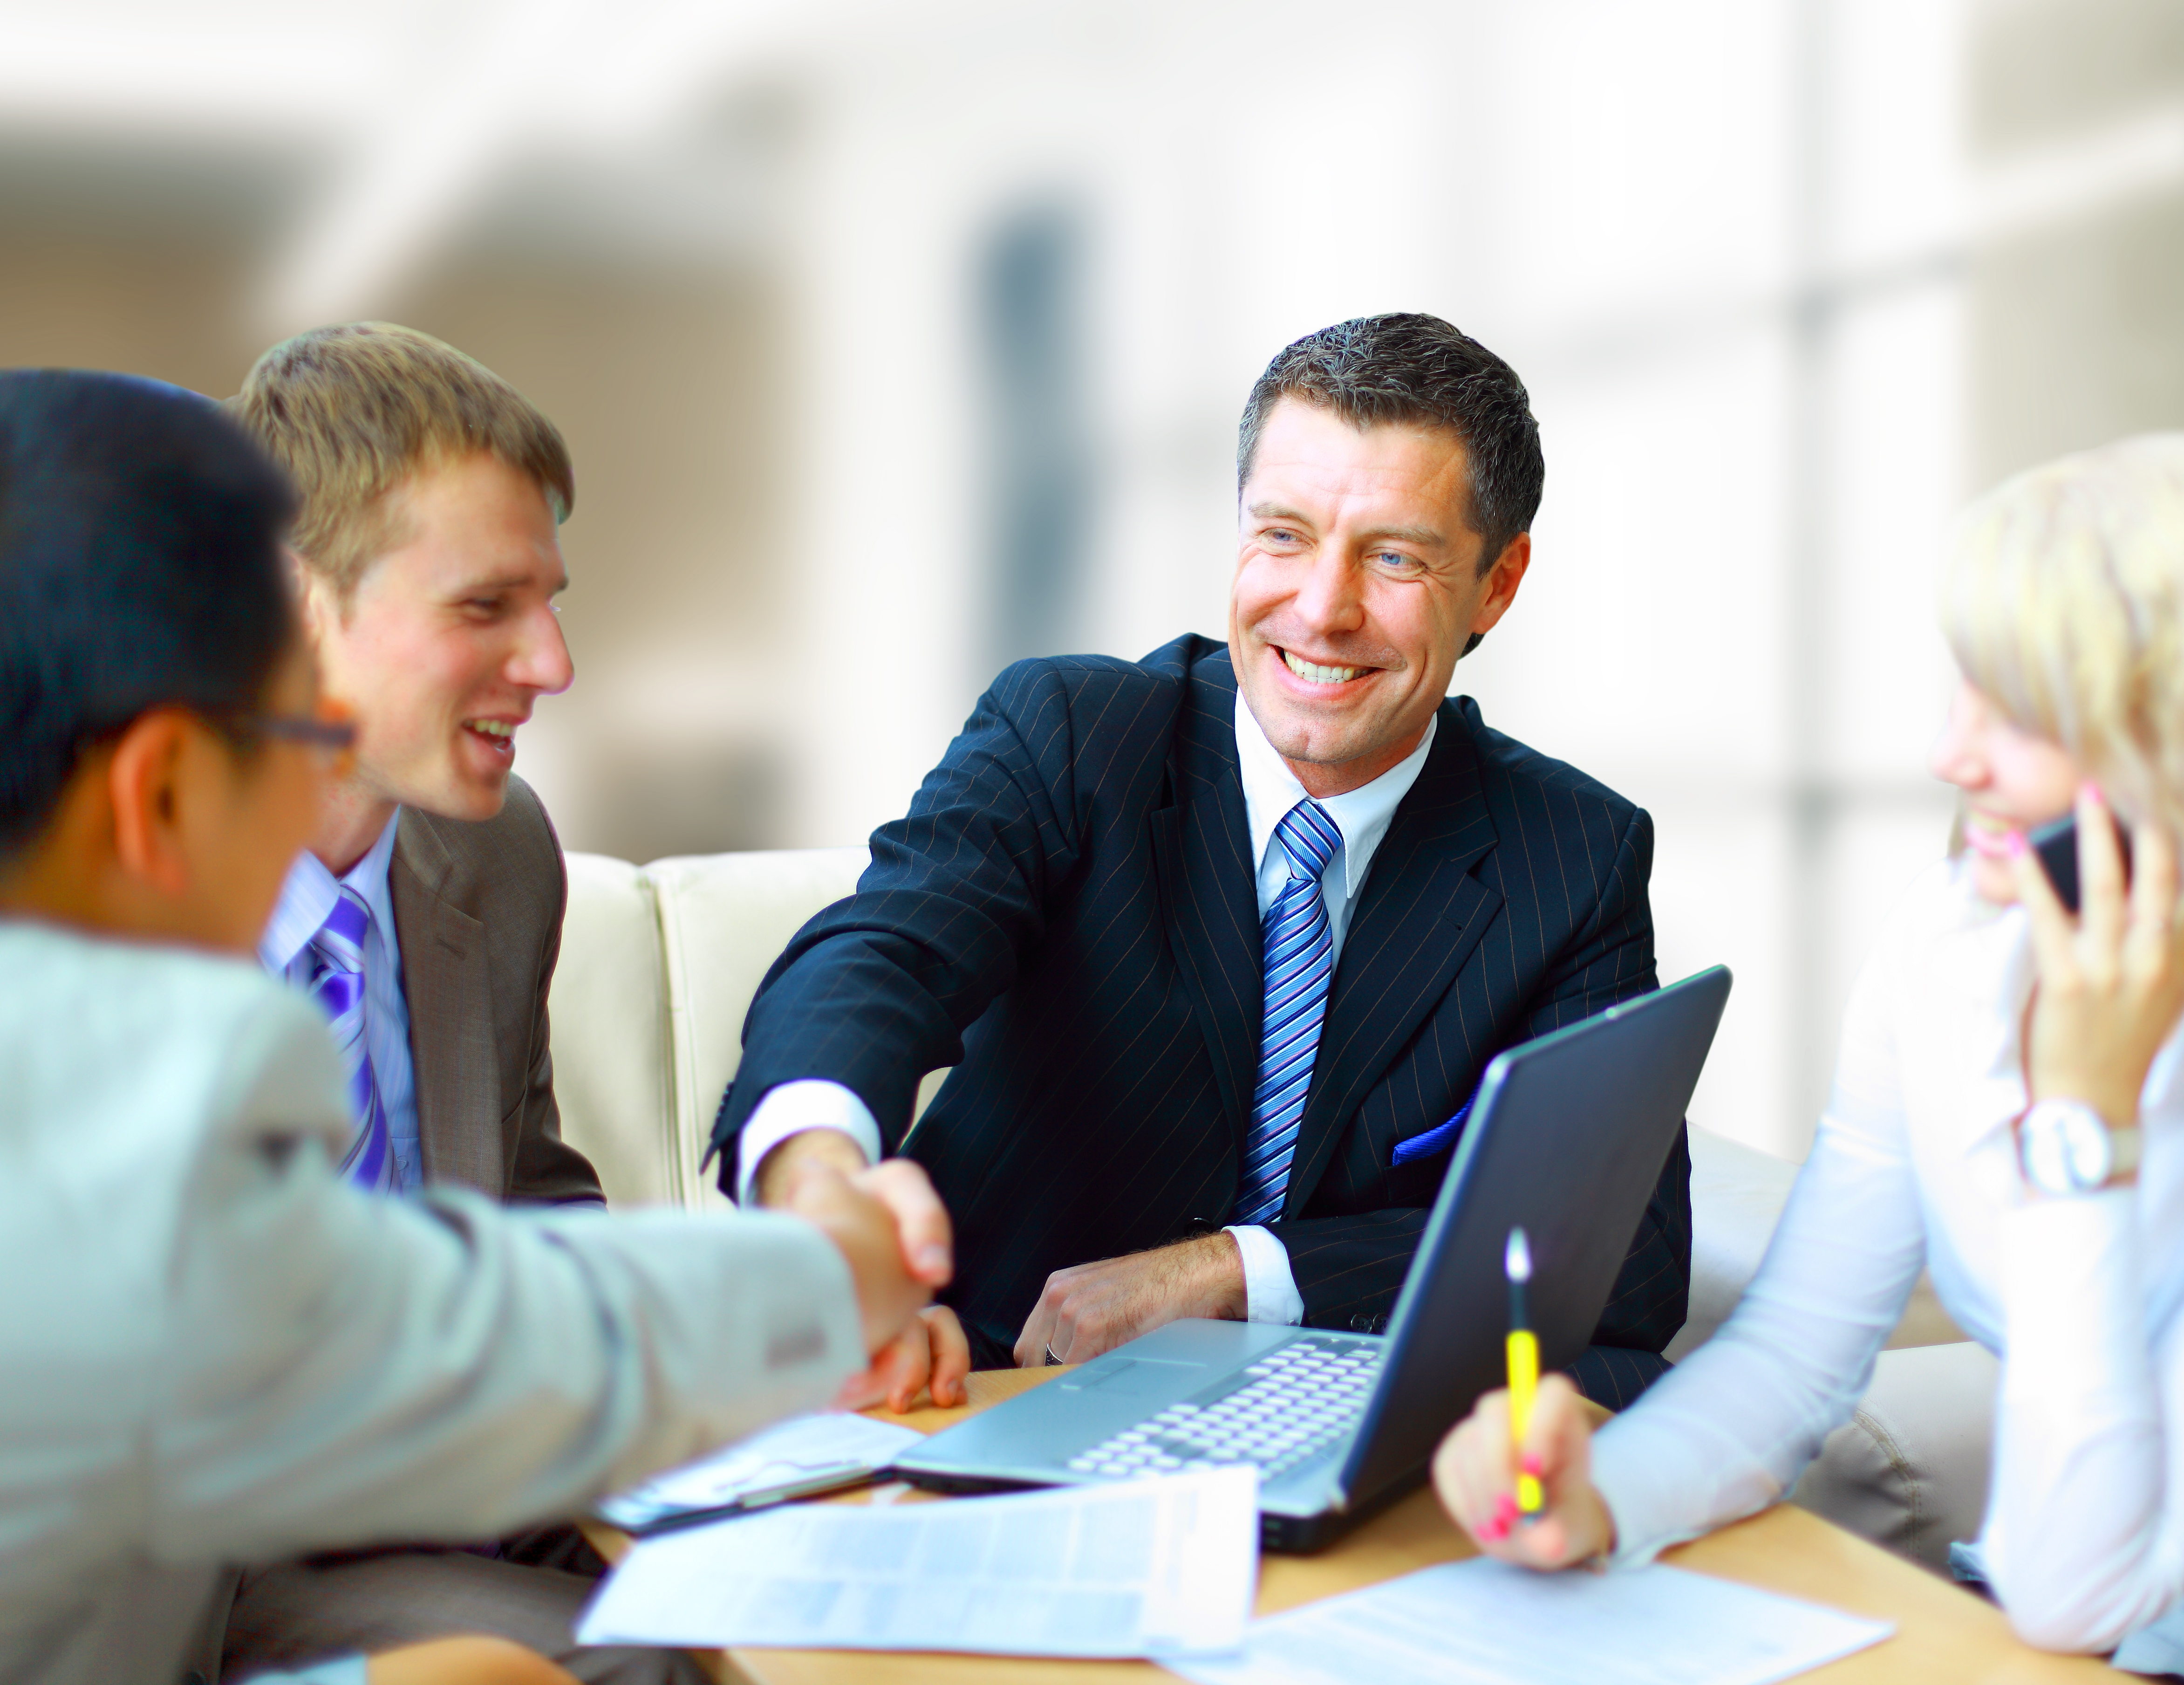 About Our Employment Agency in Ann Arbor | Express Employment Professionals Ann Arbor